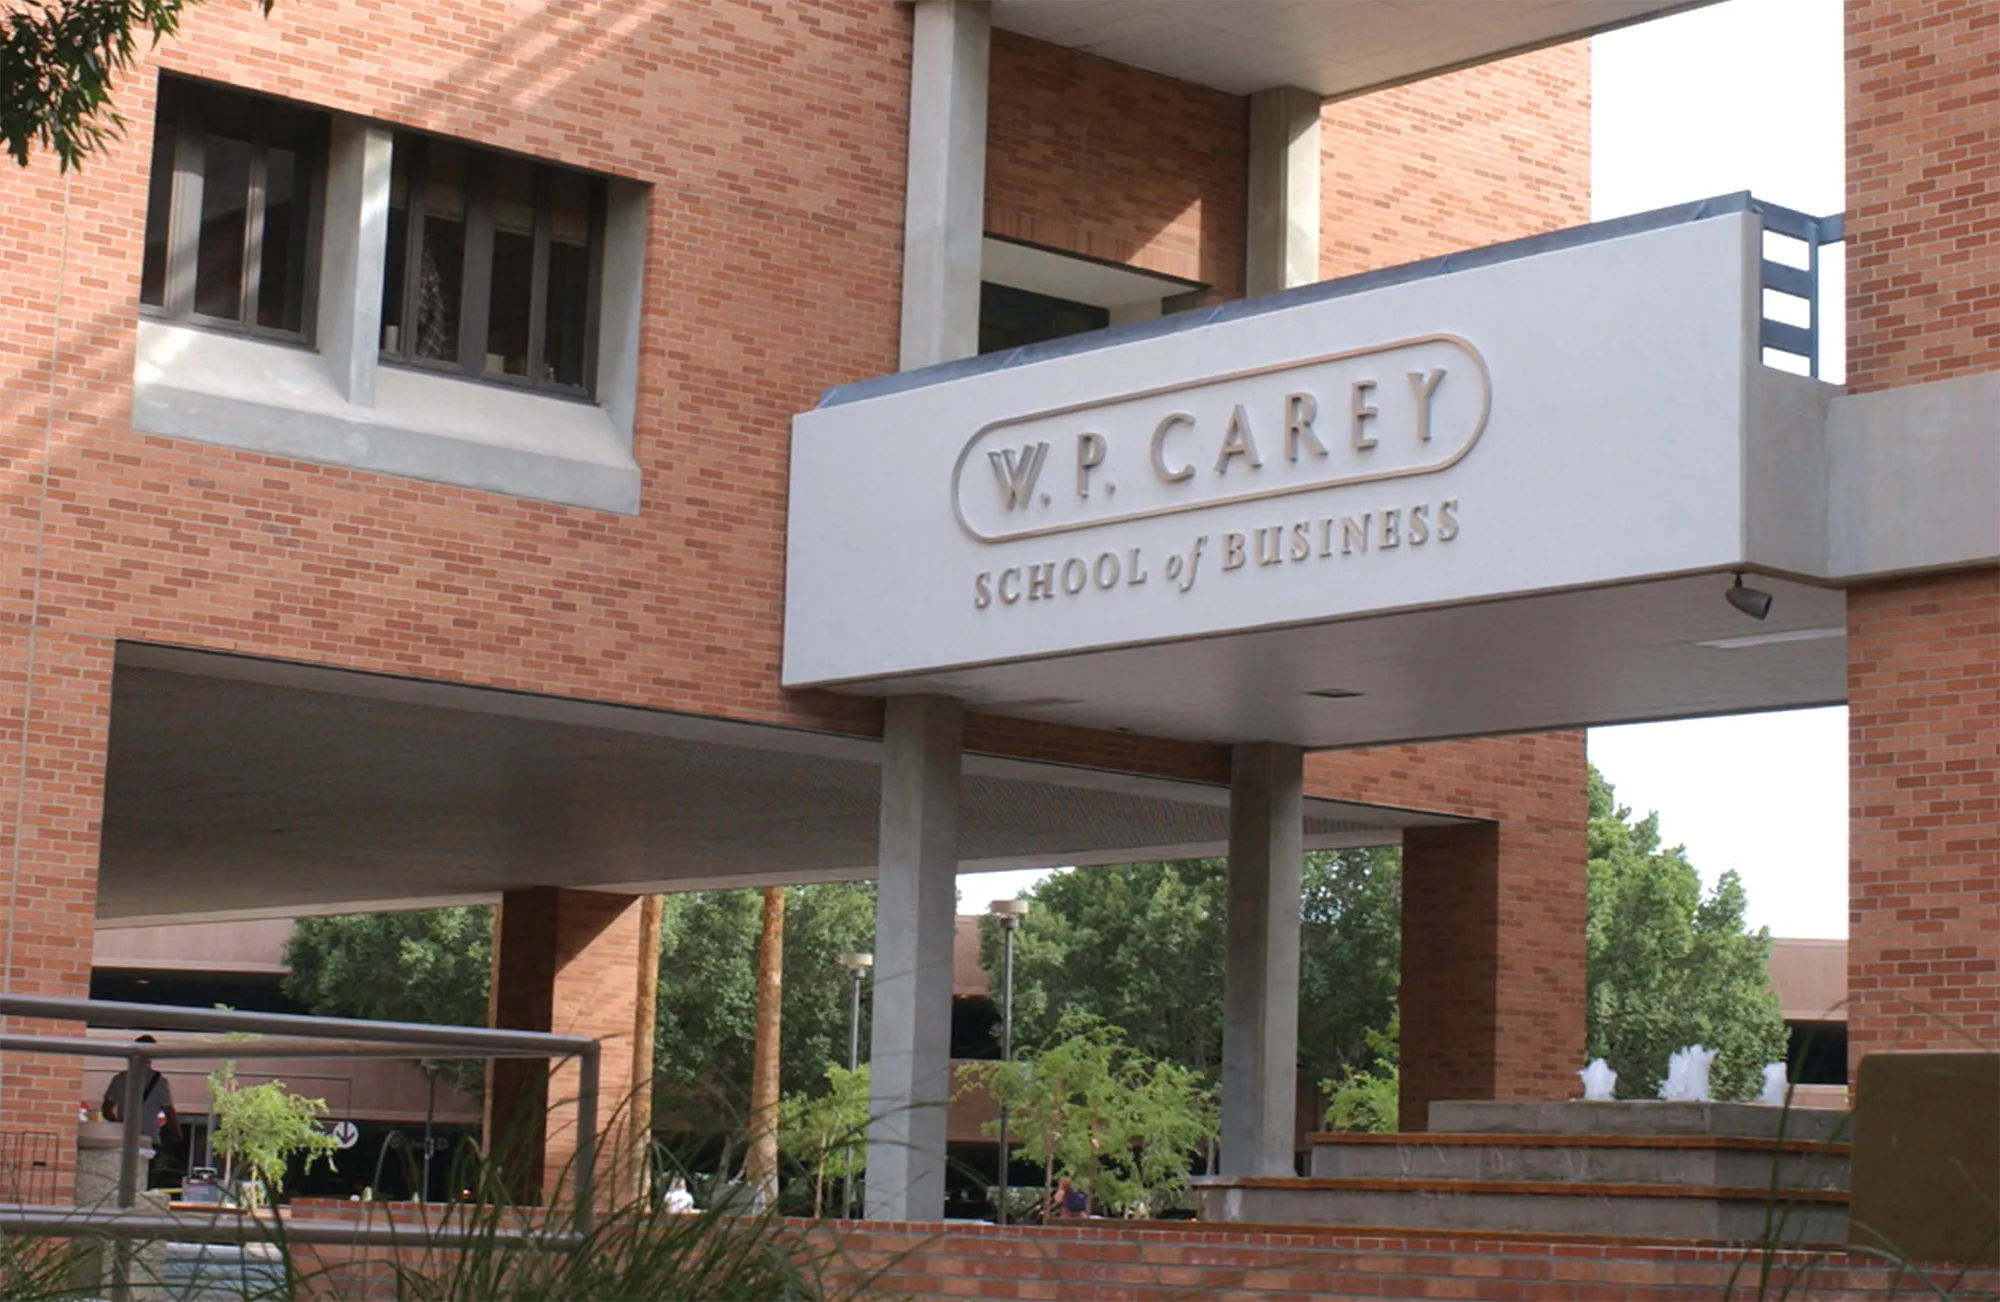 Campus building balcony with W.P. Carey School of Business sign